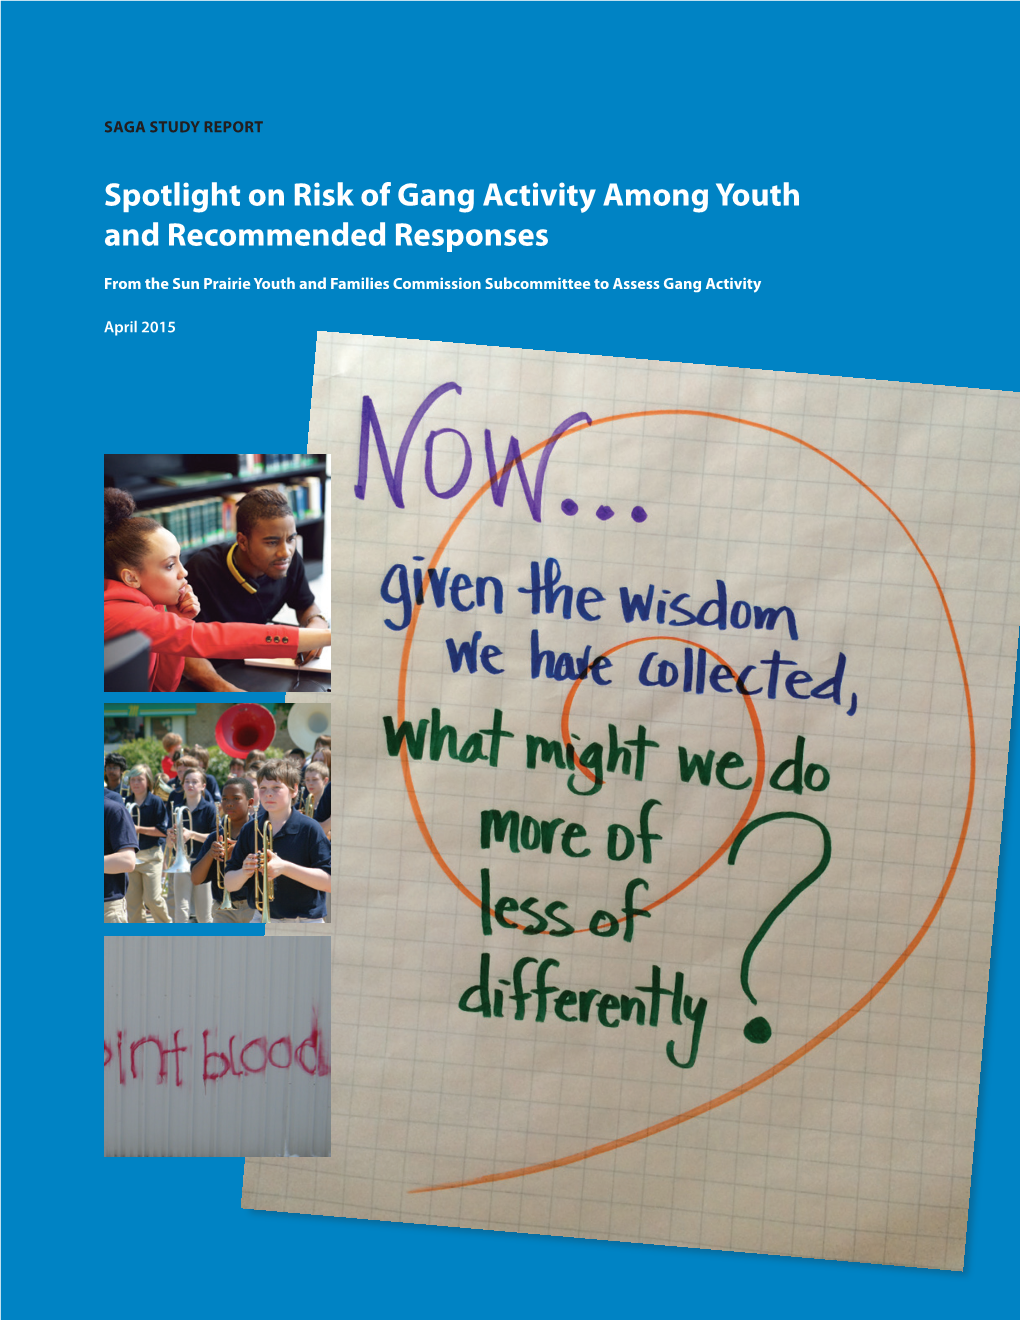 Spotlight on Risk of Gang Activity Among Youth and Recommended Responses